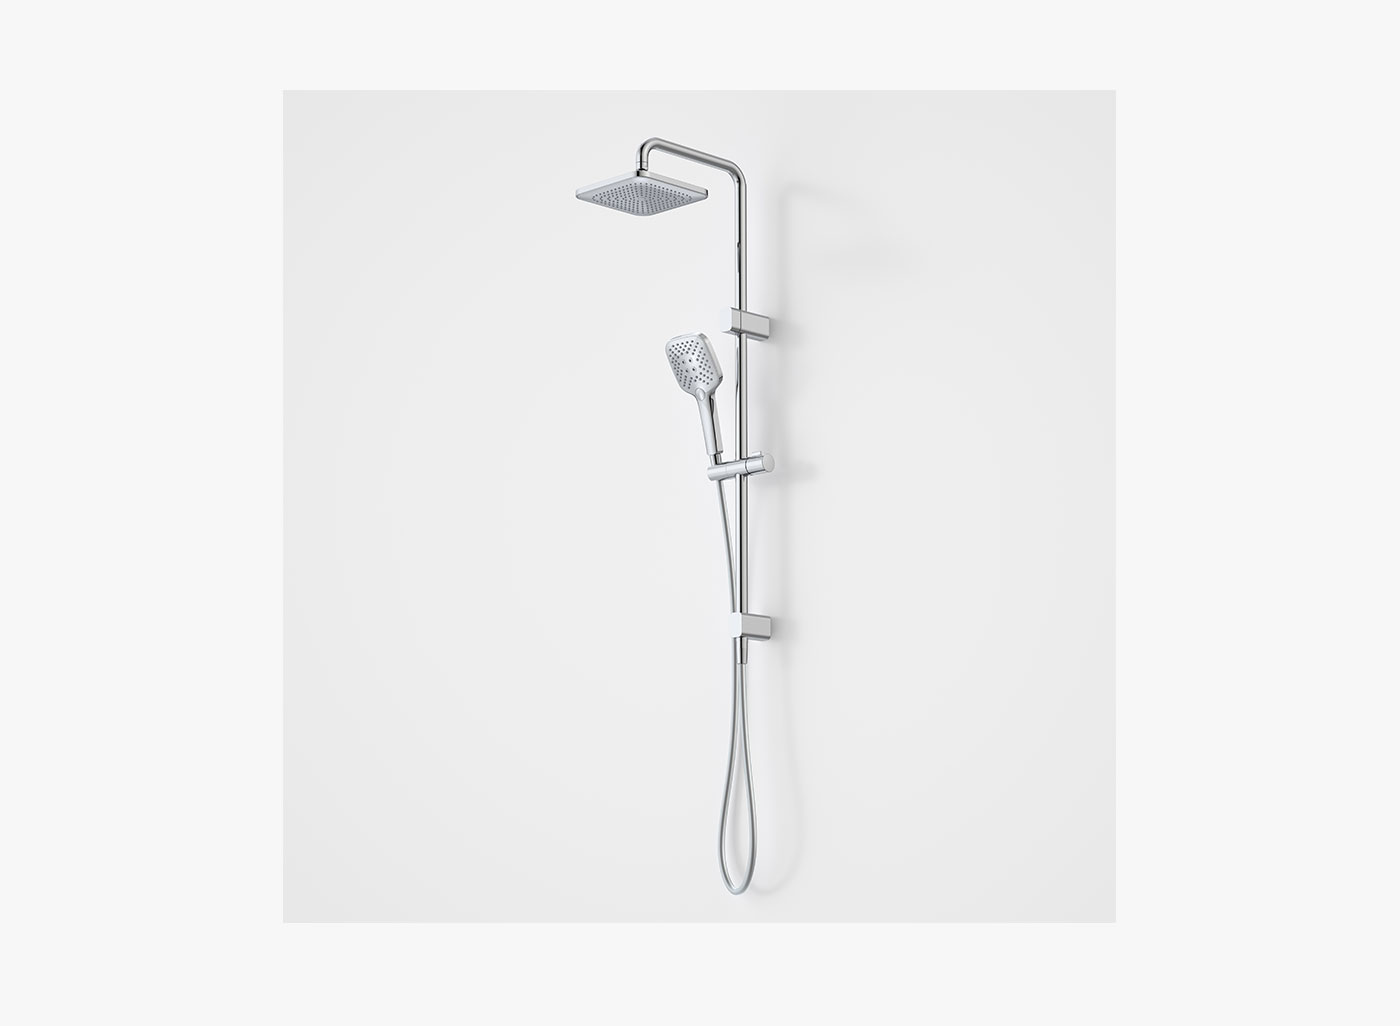 soft square shower design not only looks great